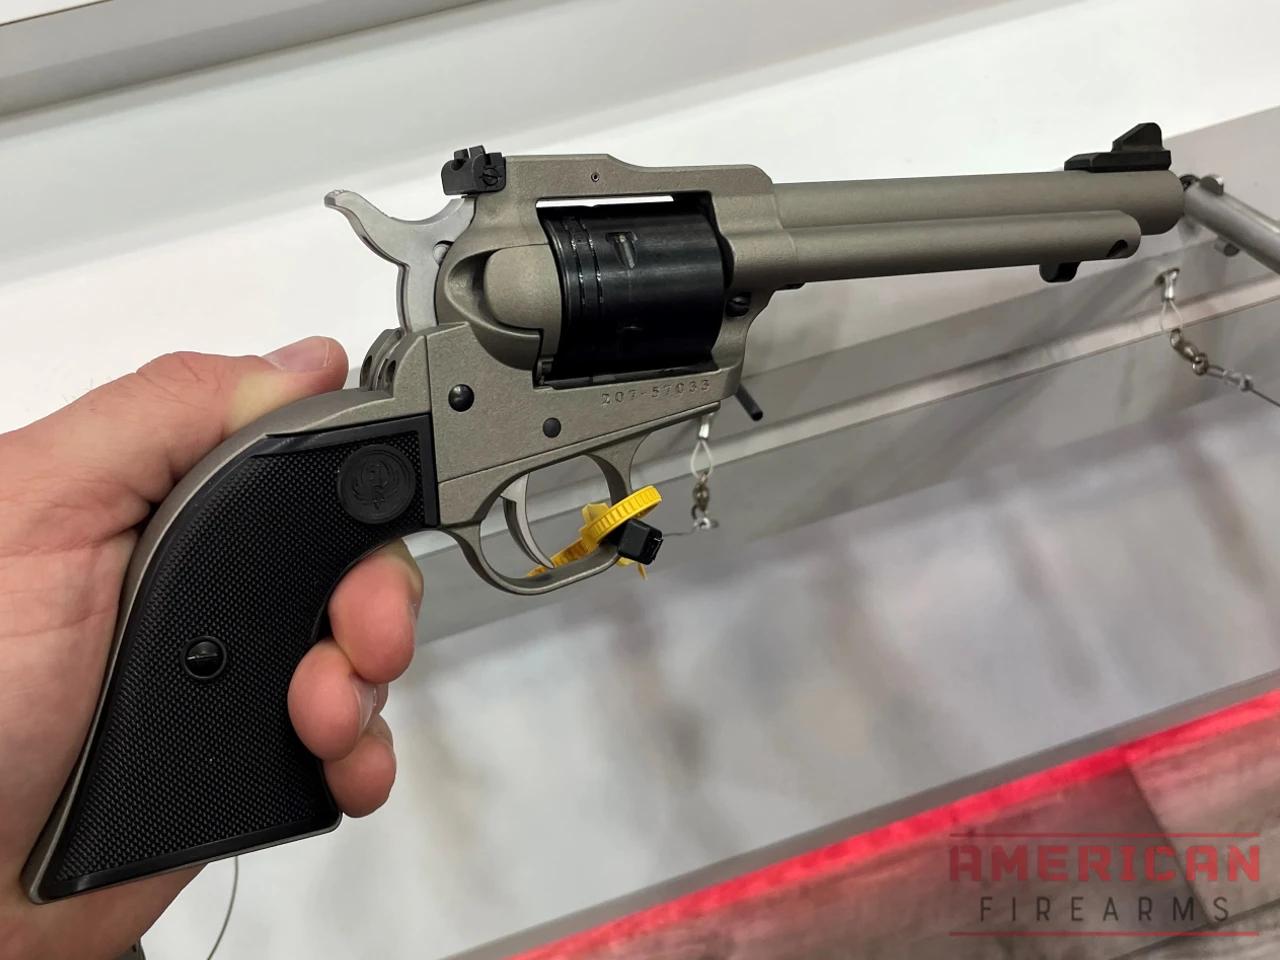 The Cerakoted alloy framed single-action plinker is a step up from the company's Wrangler